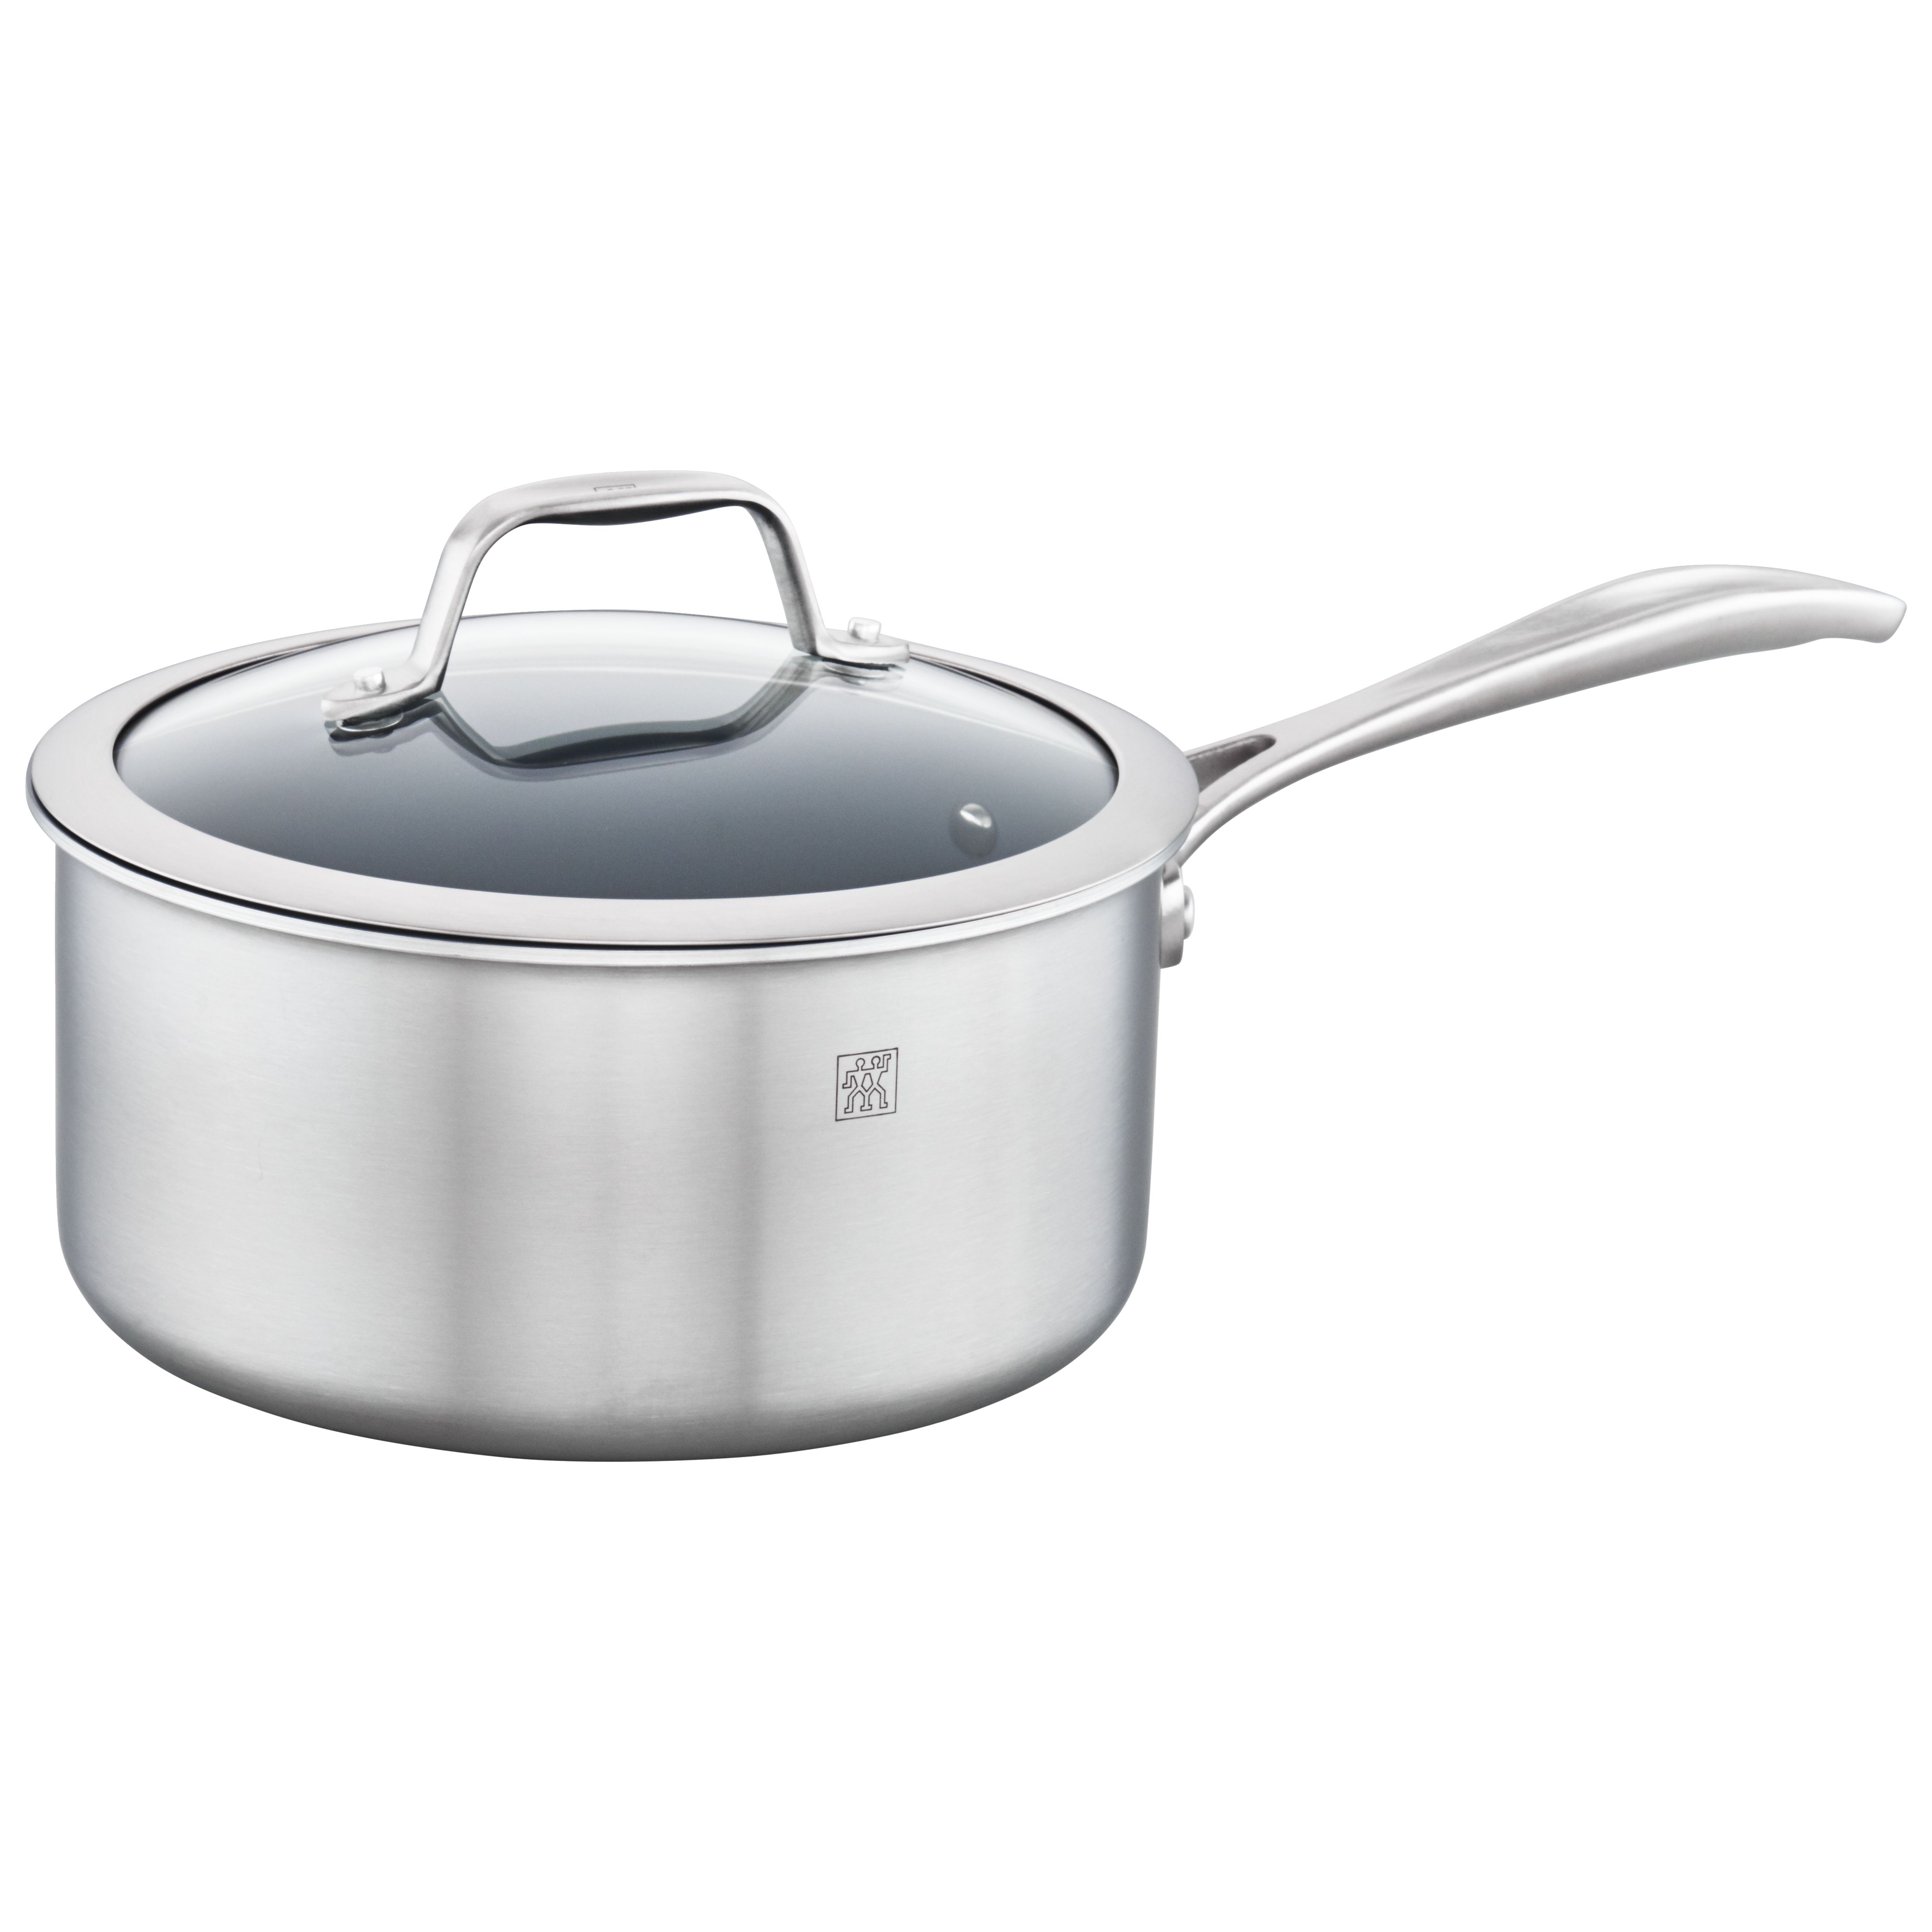 Zwilling Energy Plus 2-qt Stainless Steel Ceramic Nonstick Tall